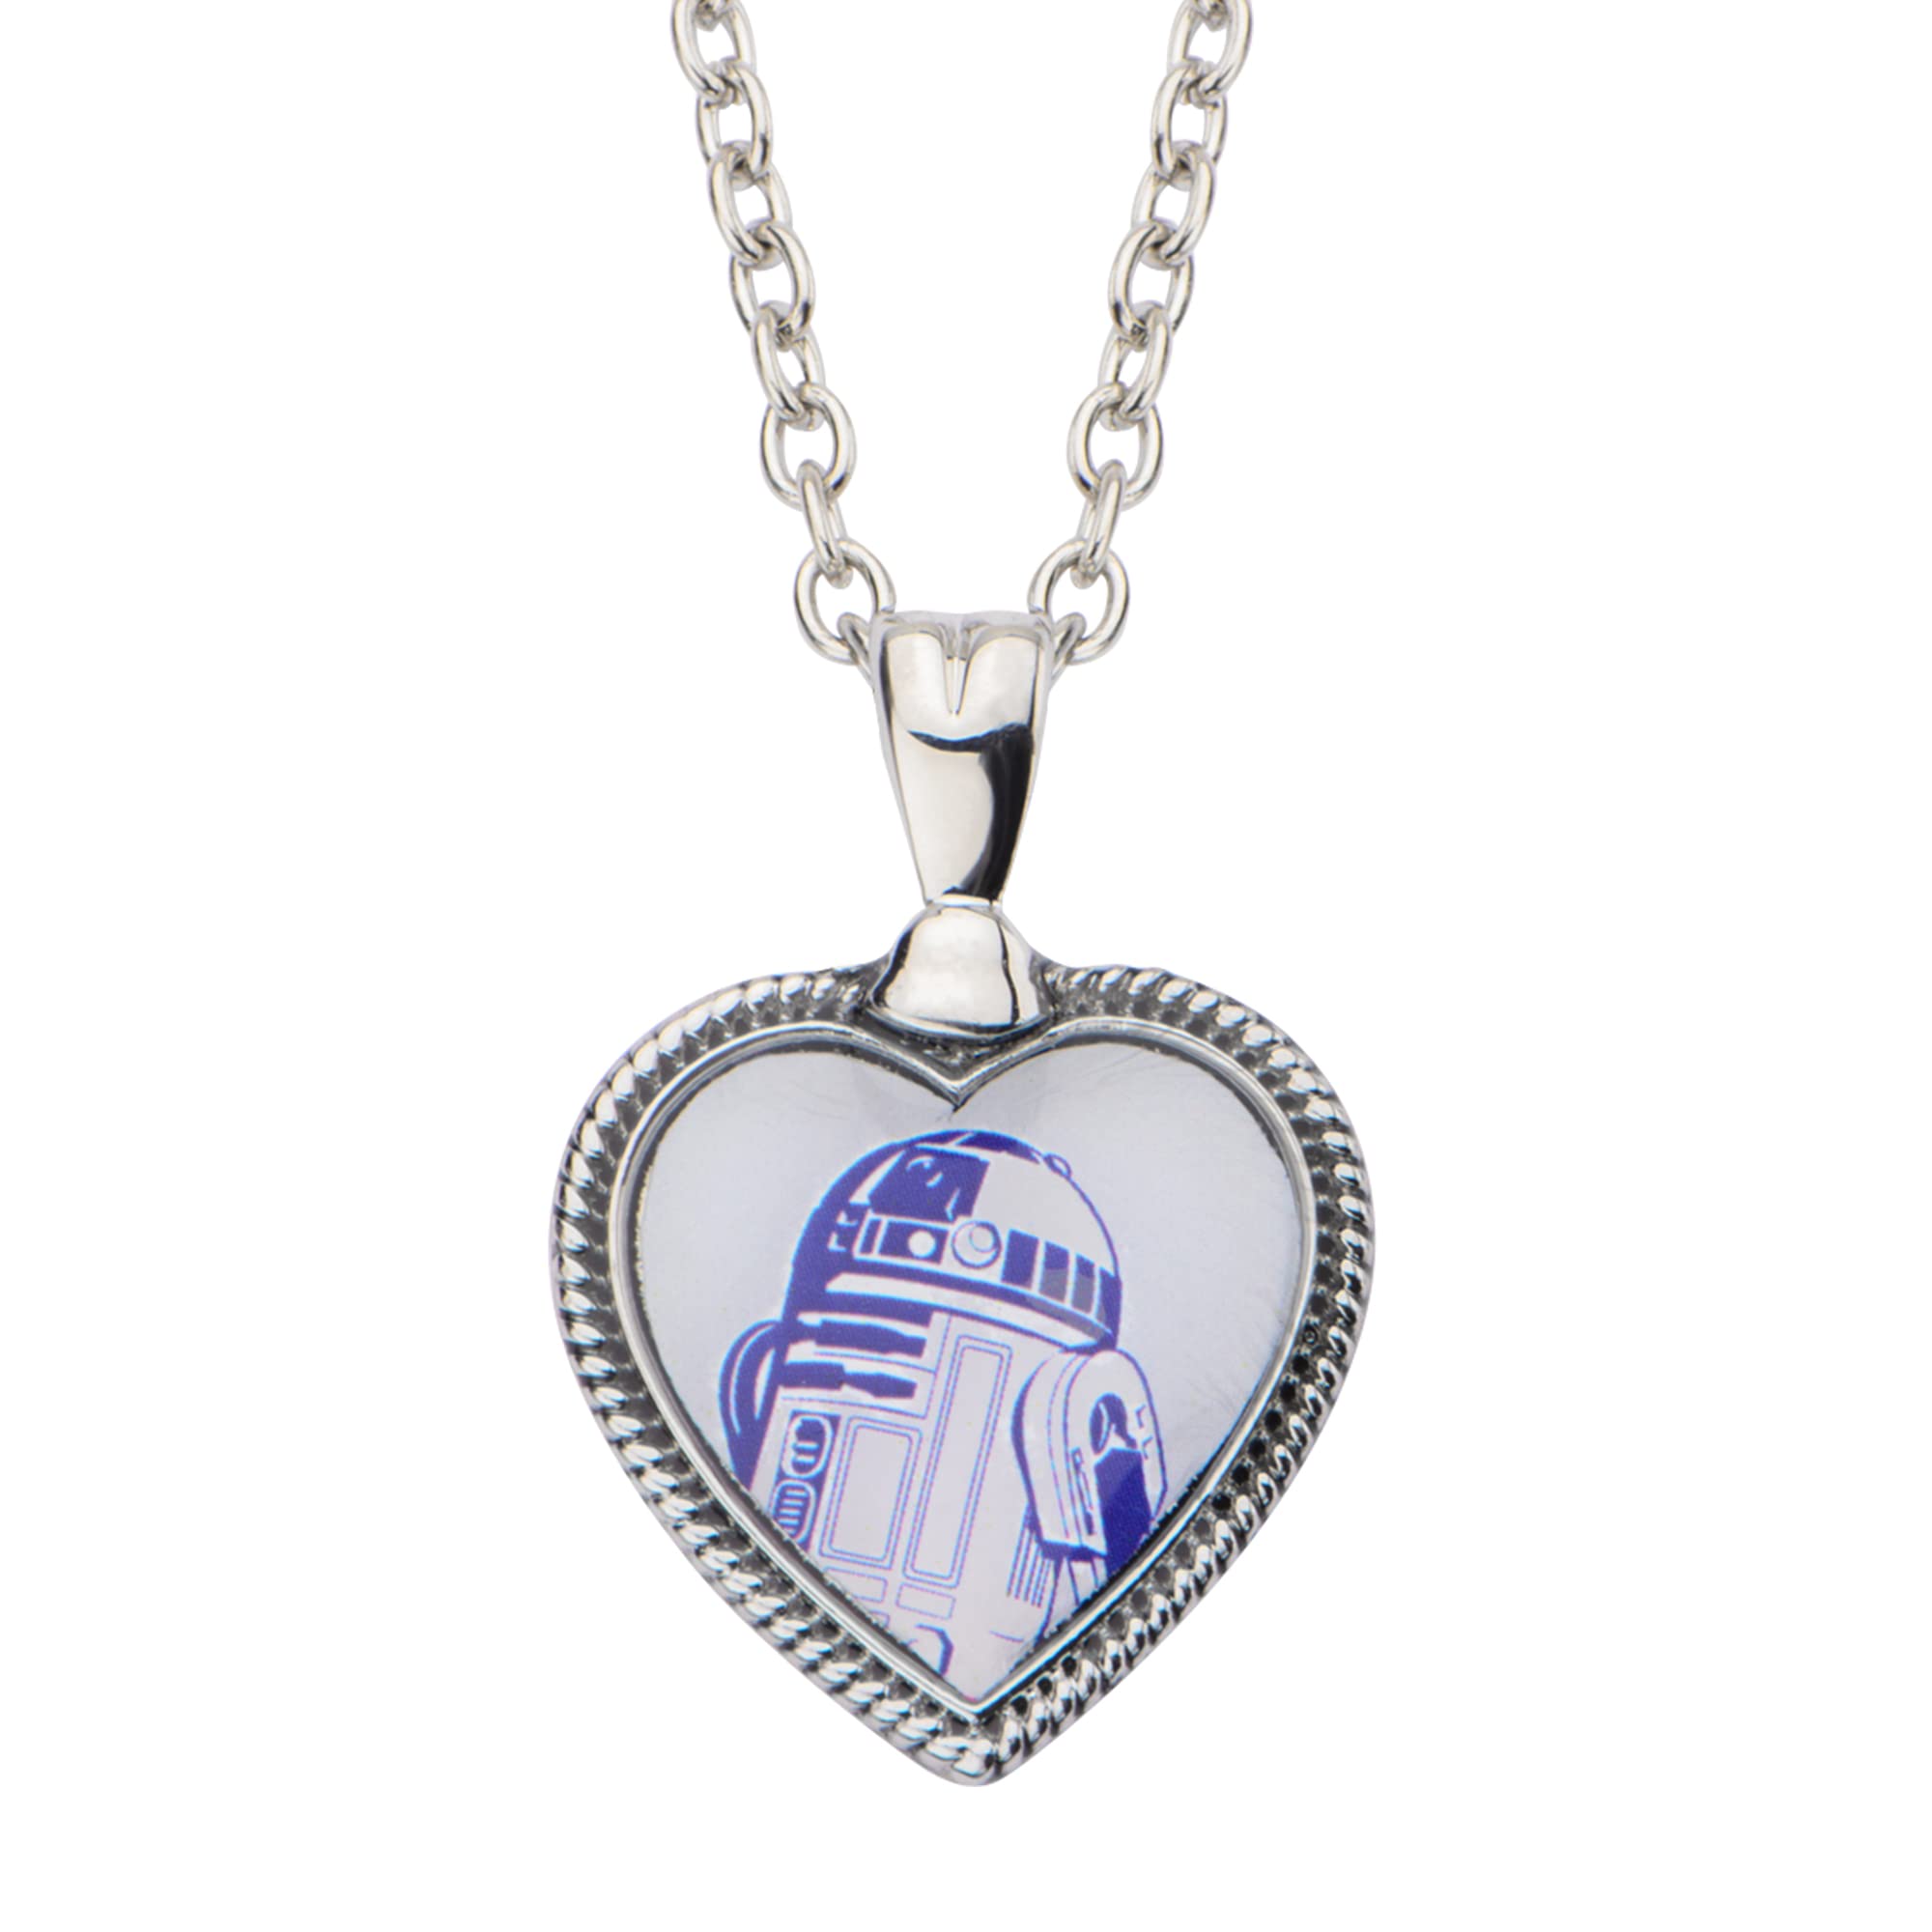 Star Wars Jewelry R2-D2 Stainless Steel Heart Pendant Necklace, 18